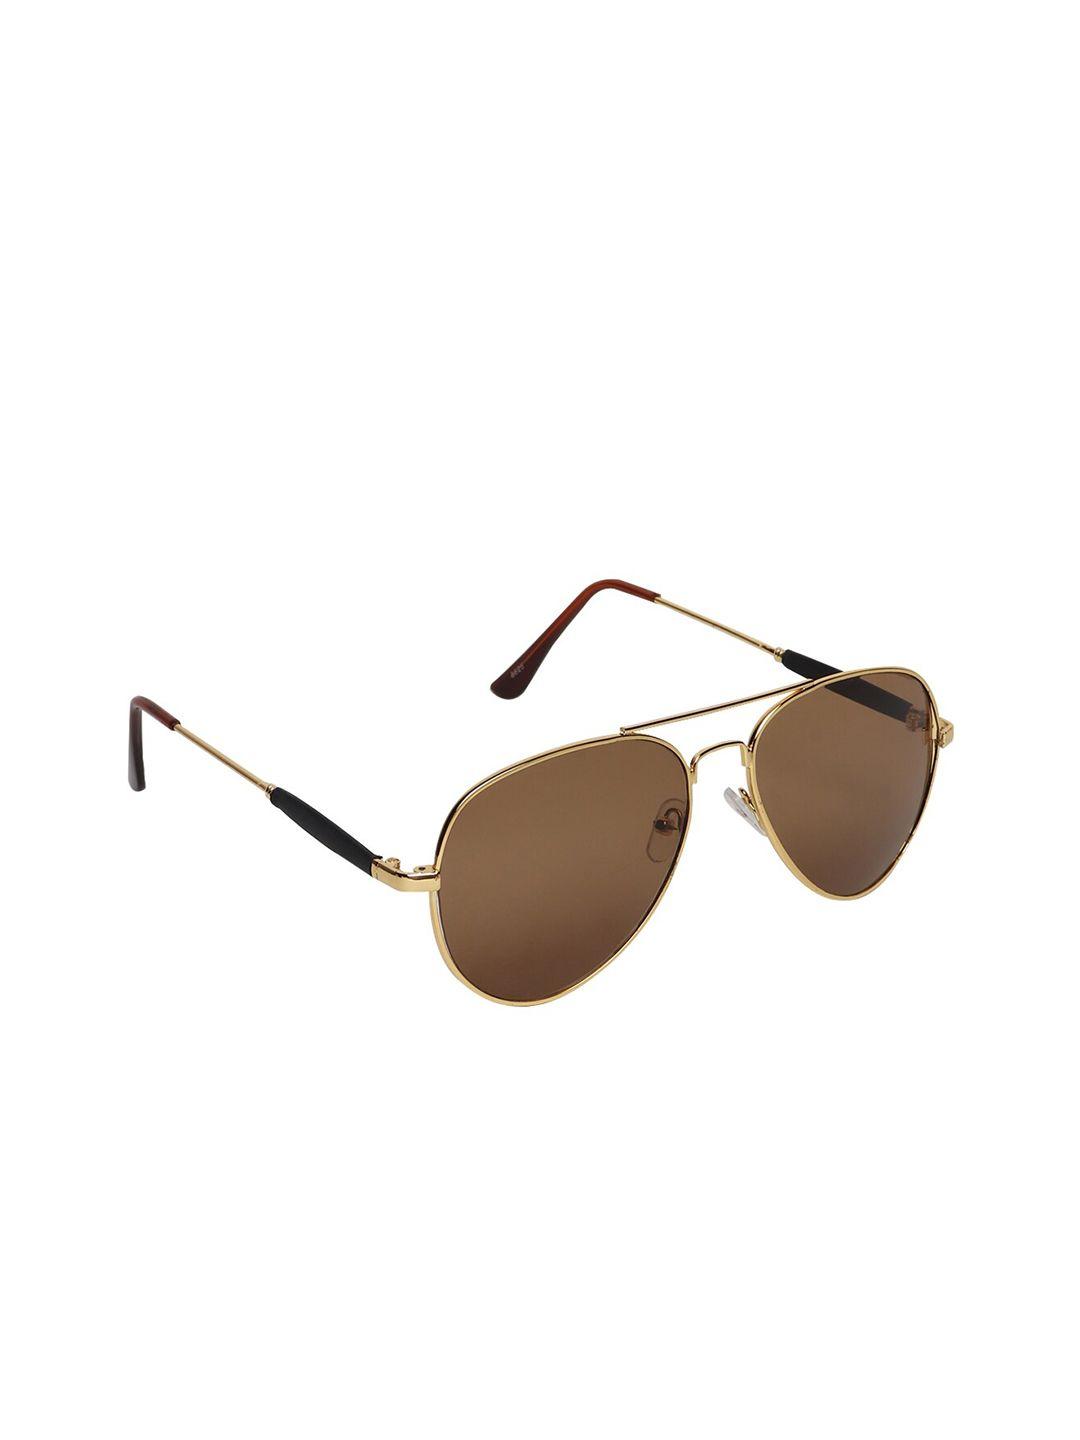 criba unisex brown lens & gold-toned aviator sunglasses with uv protected lens